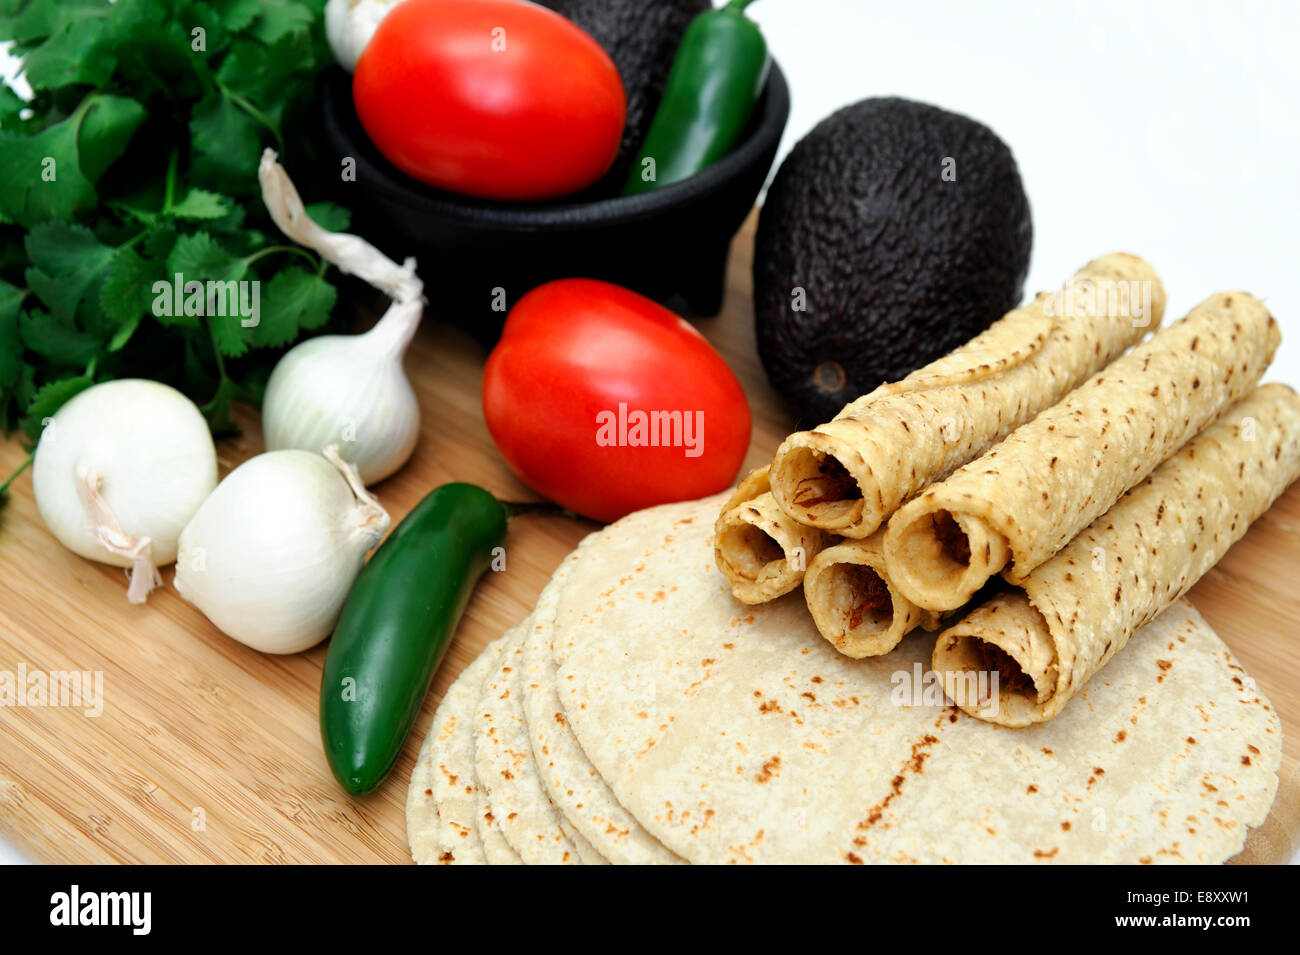 Taquitos And Vegetables Stock Photo